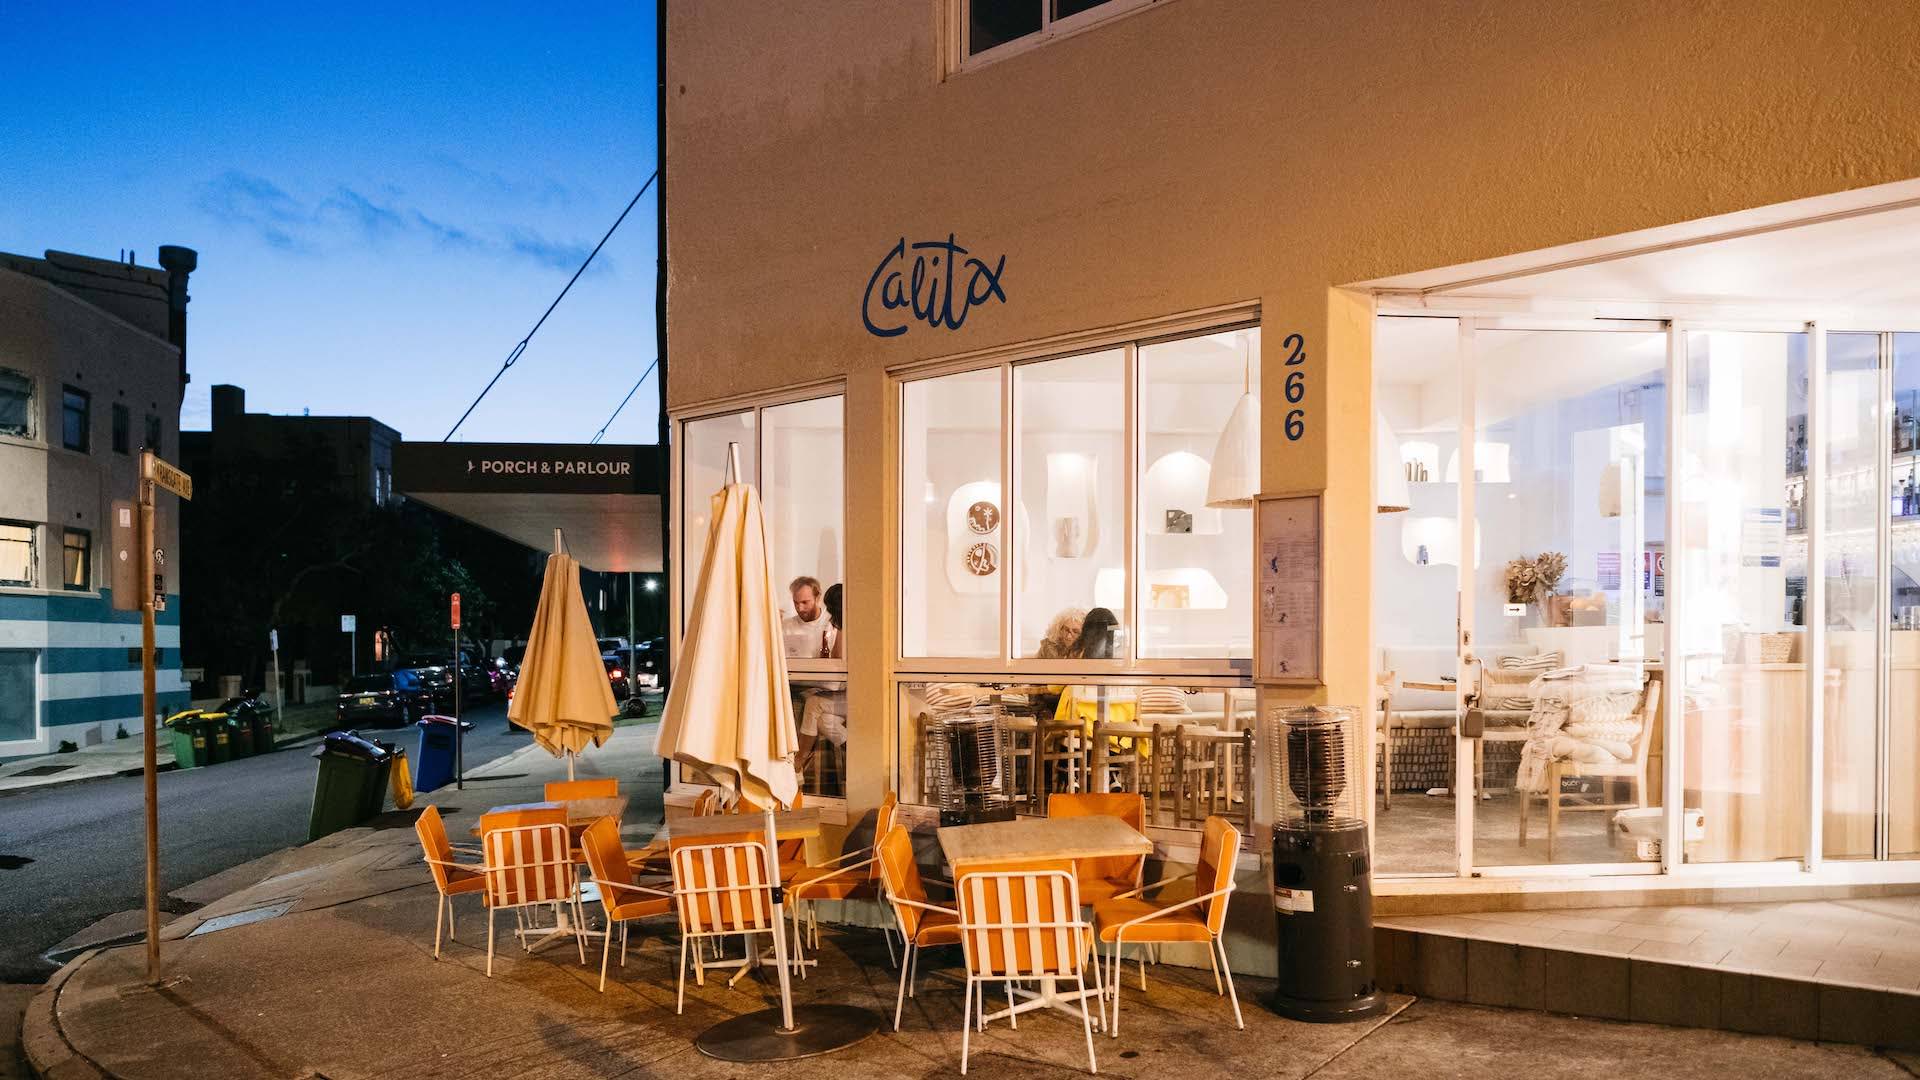 Jason Roberts Celebrates Food and Community with a Temporary Takeover of Calita in Bondi